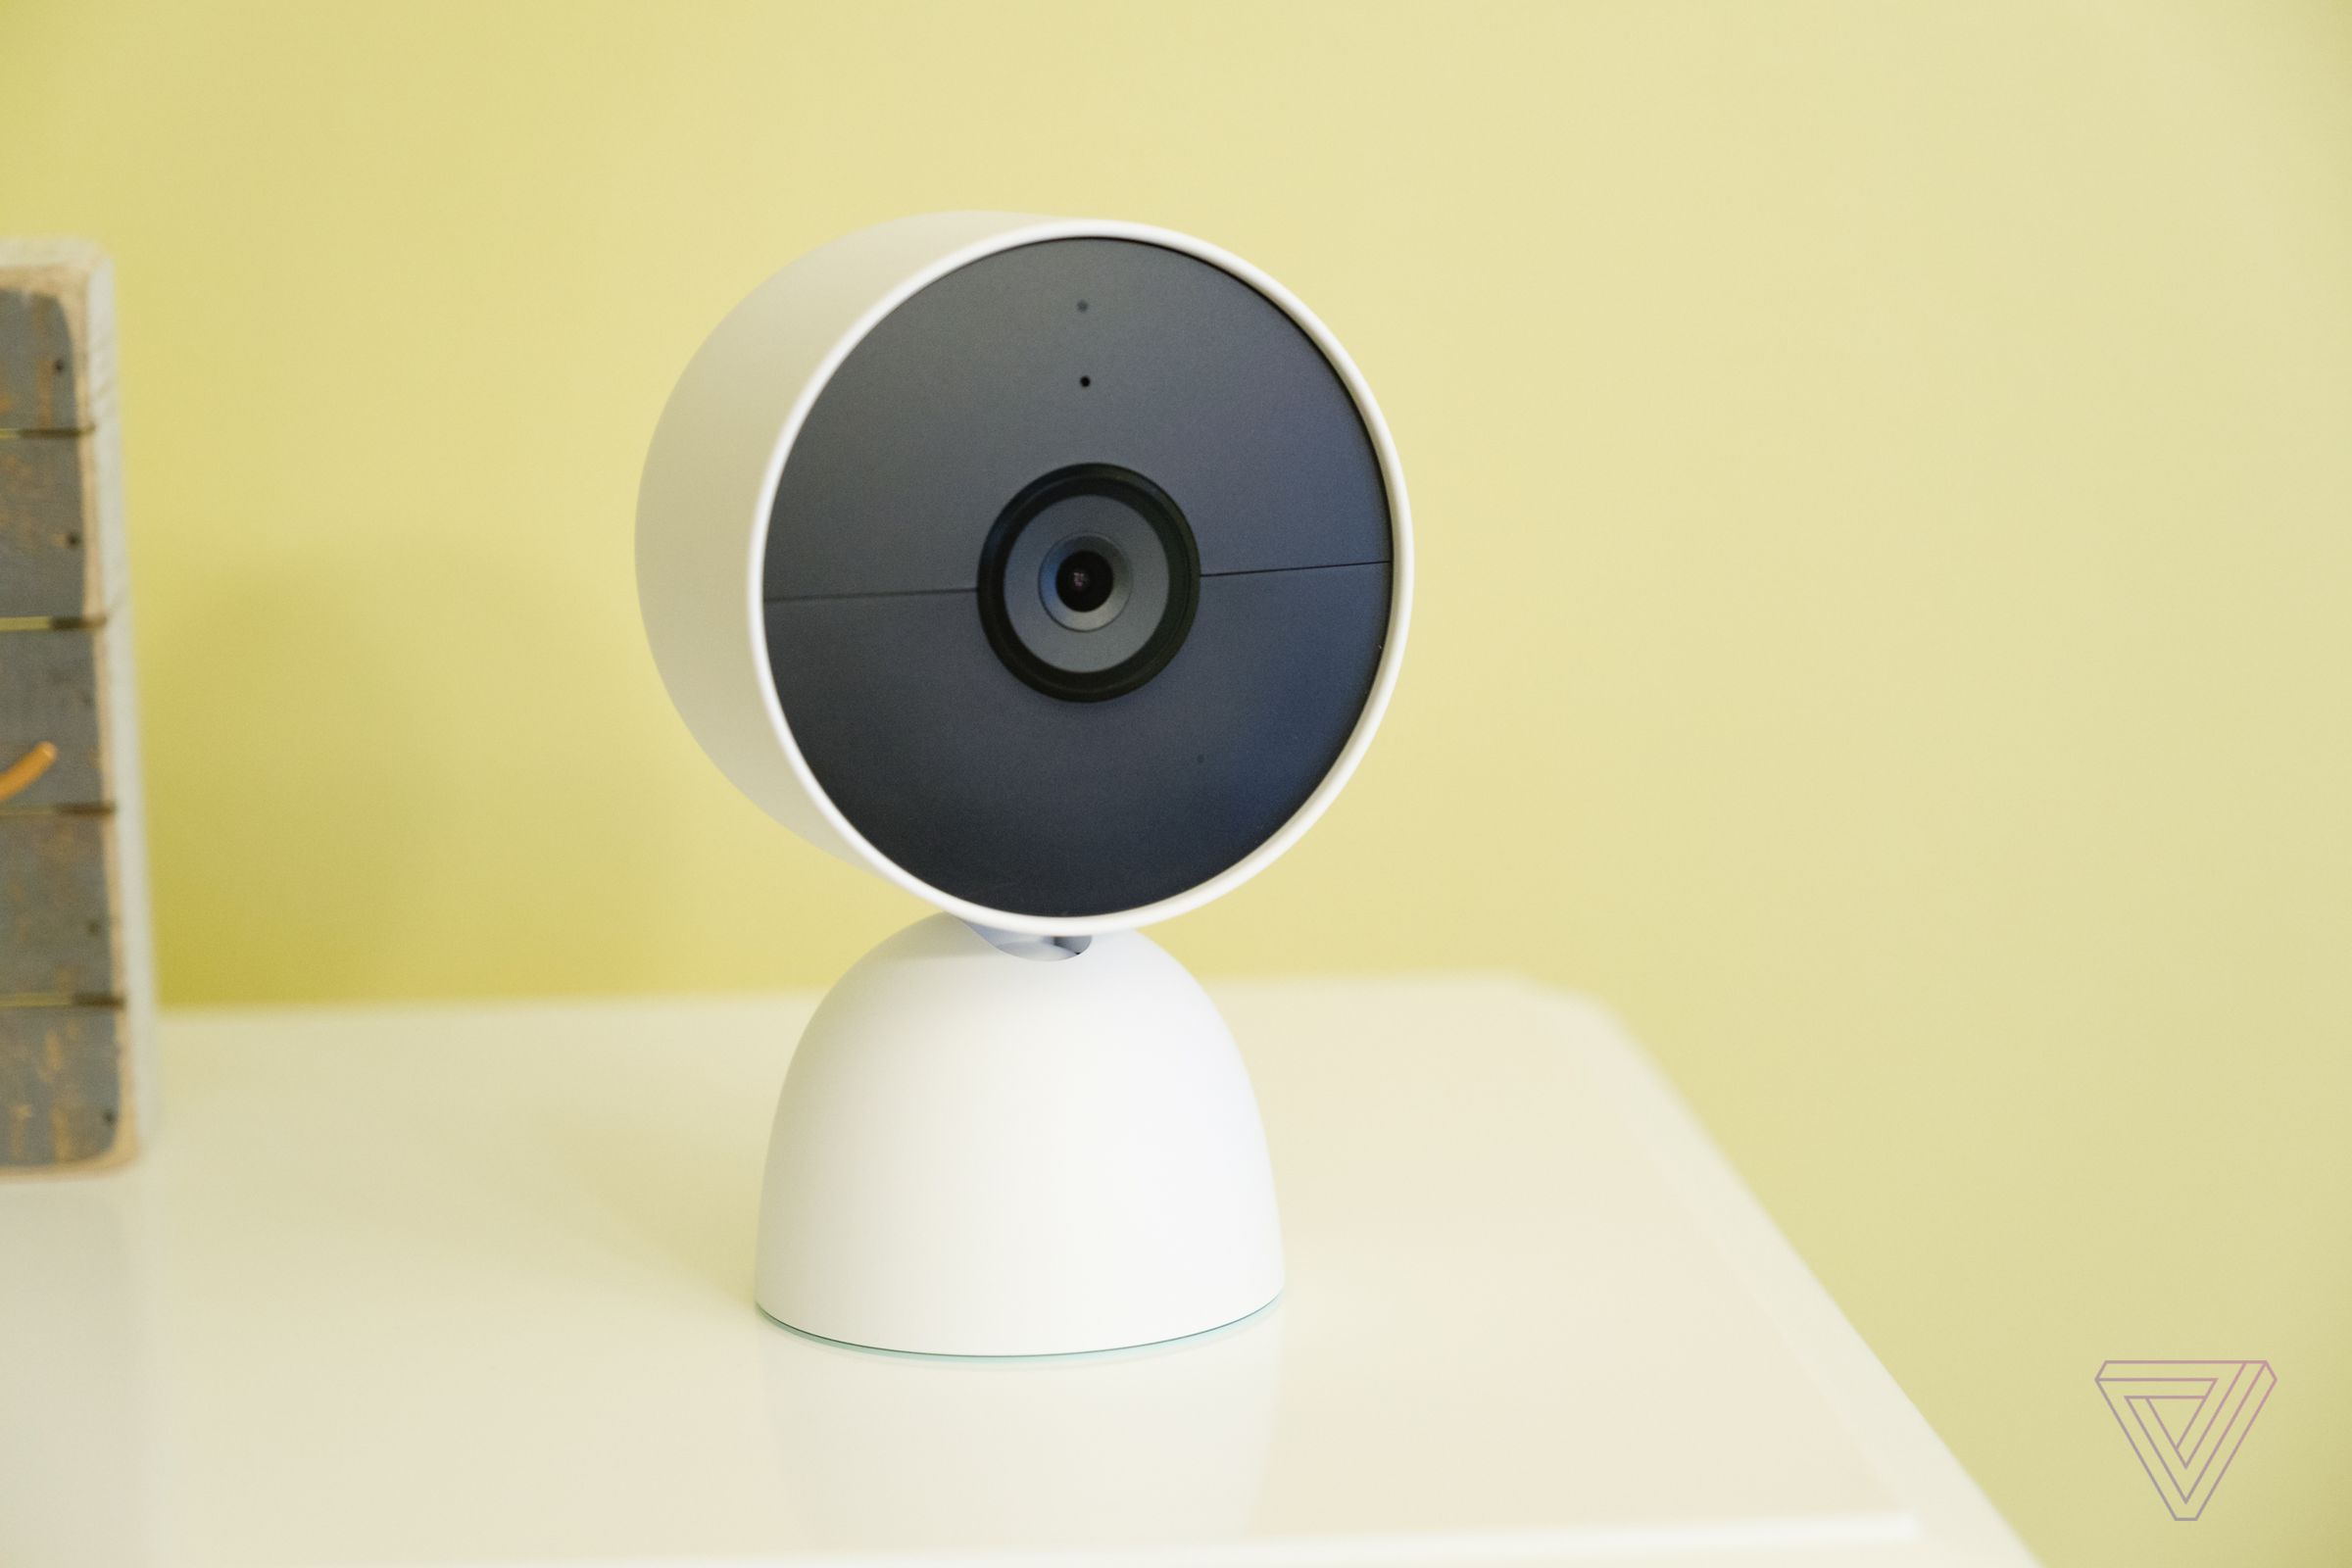 Google’s newest Nest security cameras are on sale, too.